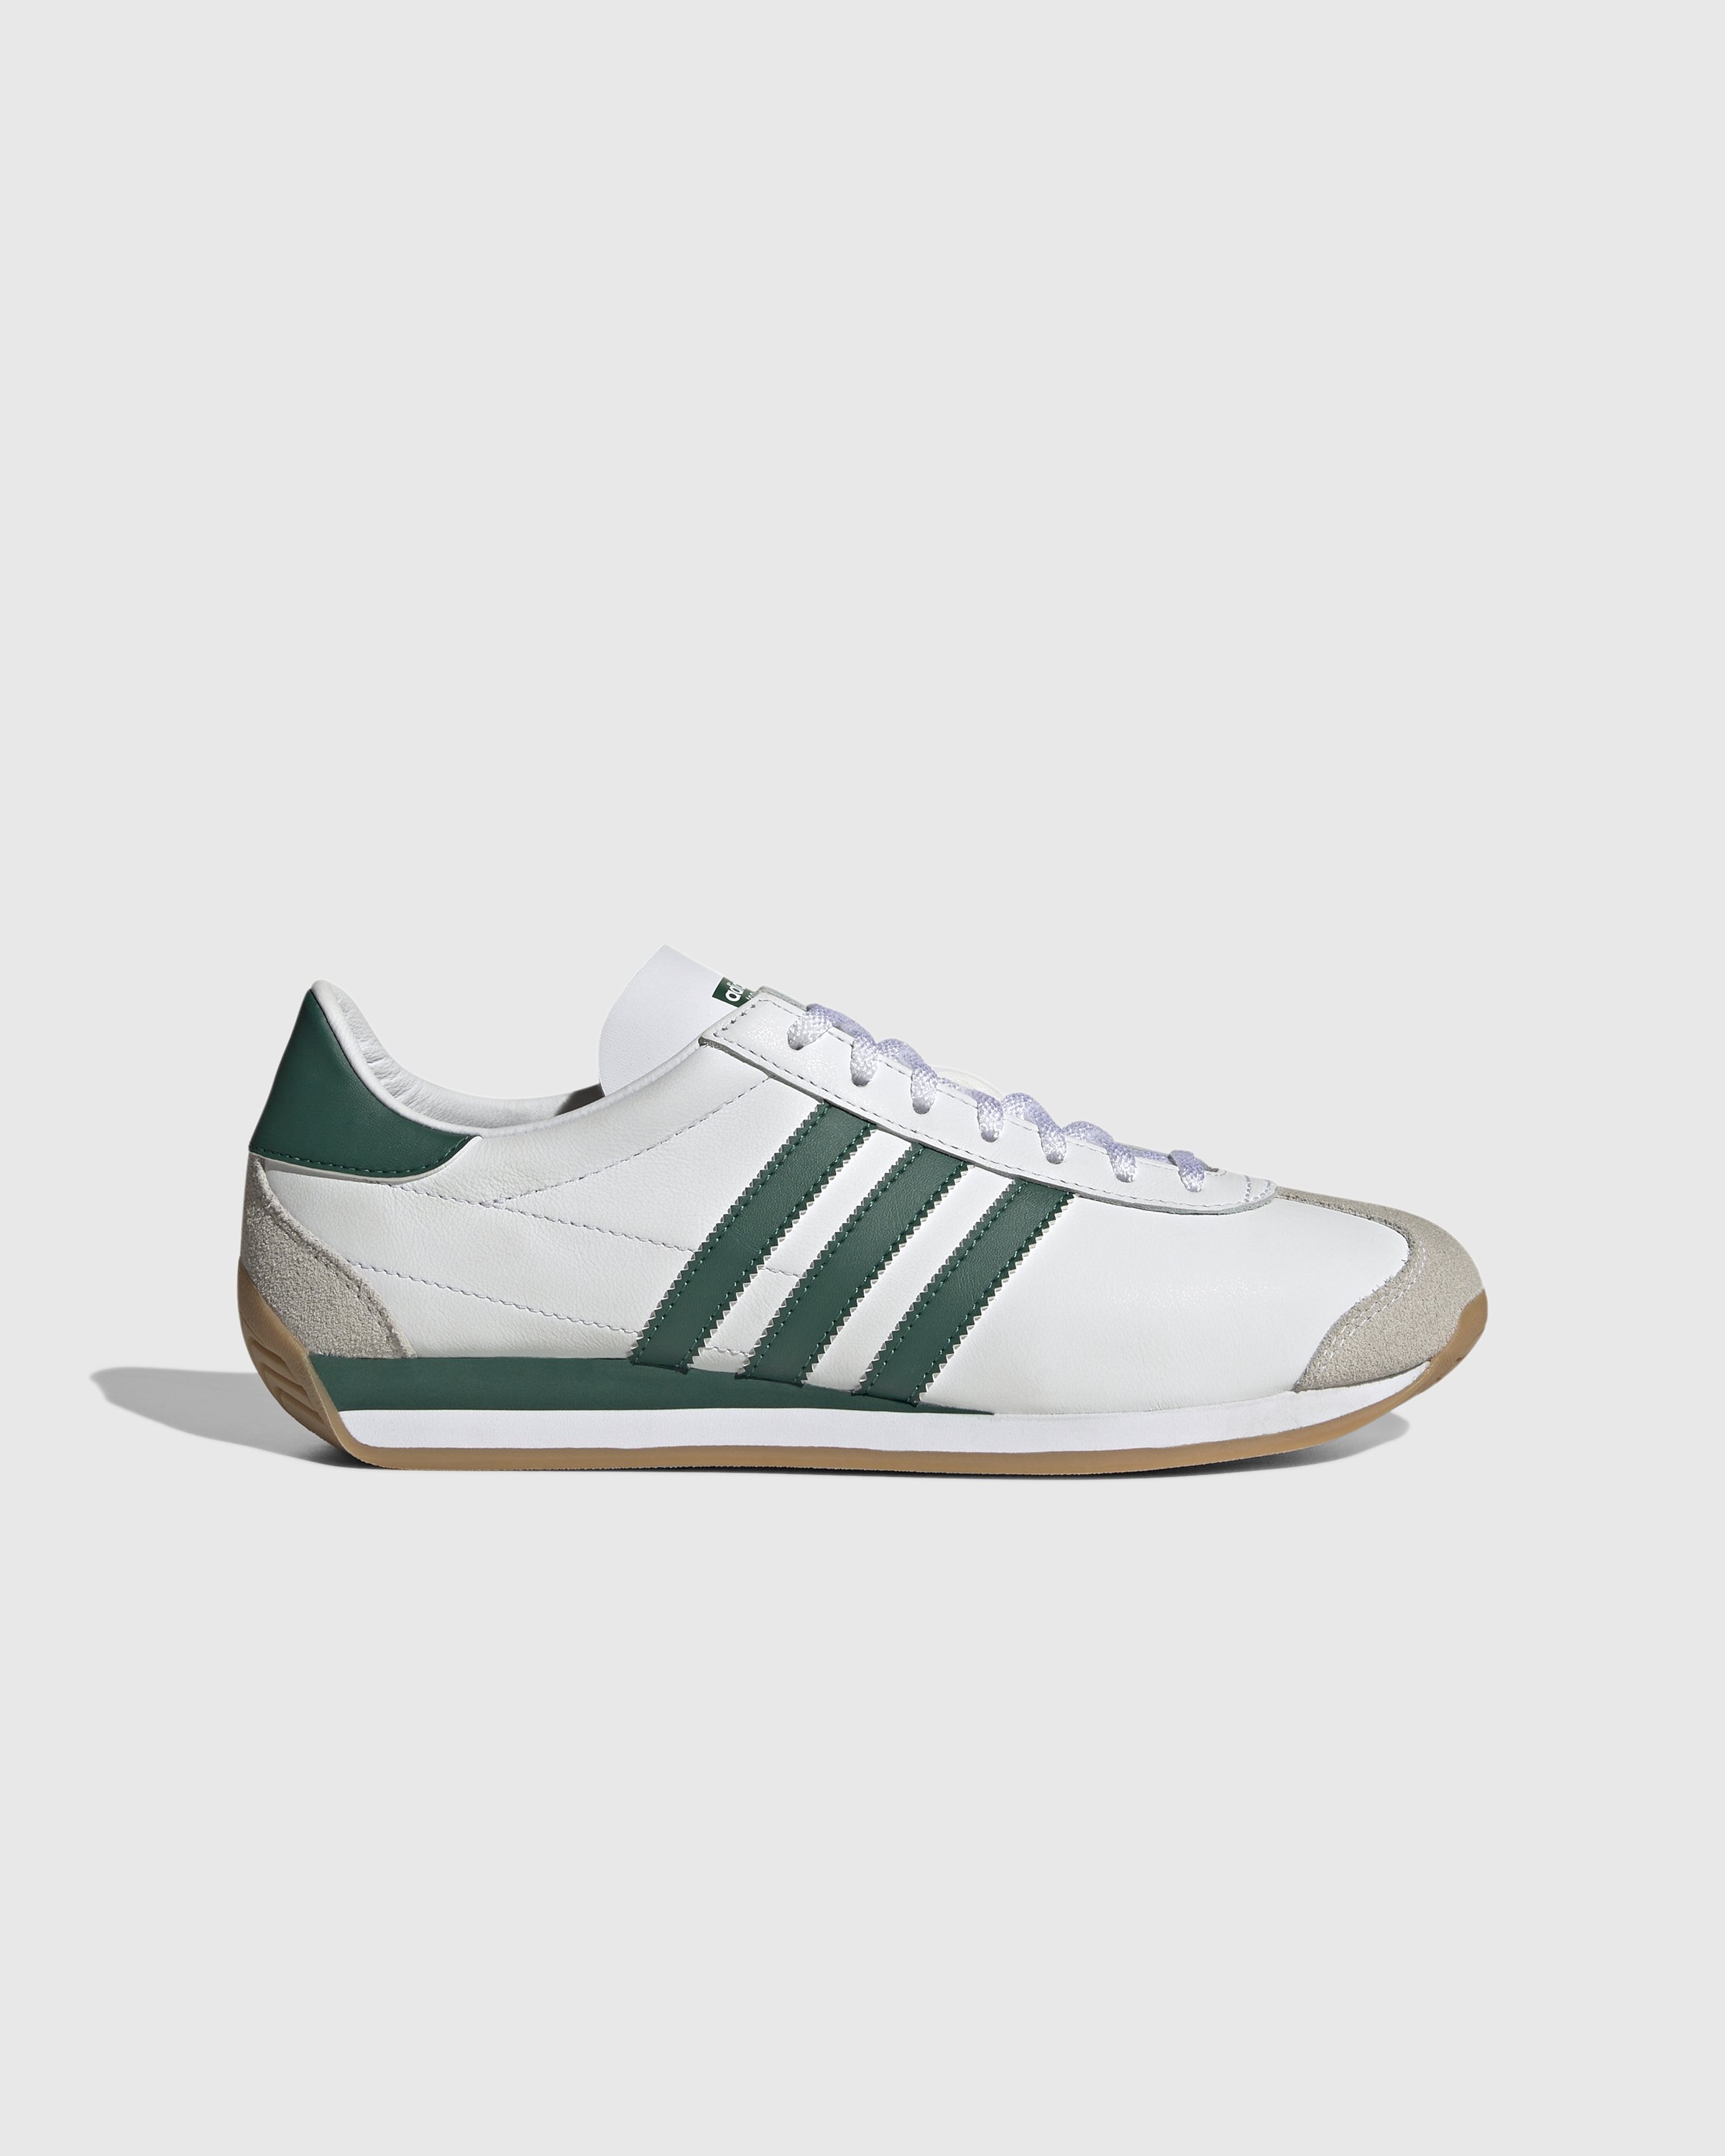 Adidas - Country OG Cloud White/Collegiate Green - Footwear - White - Image 1